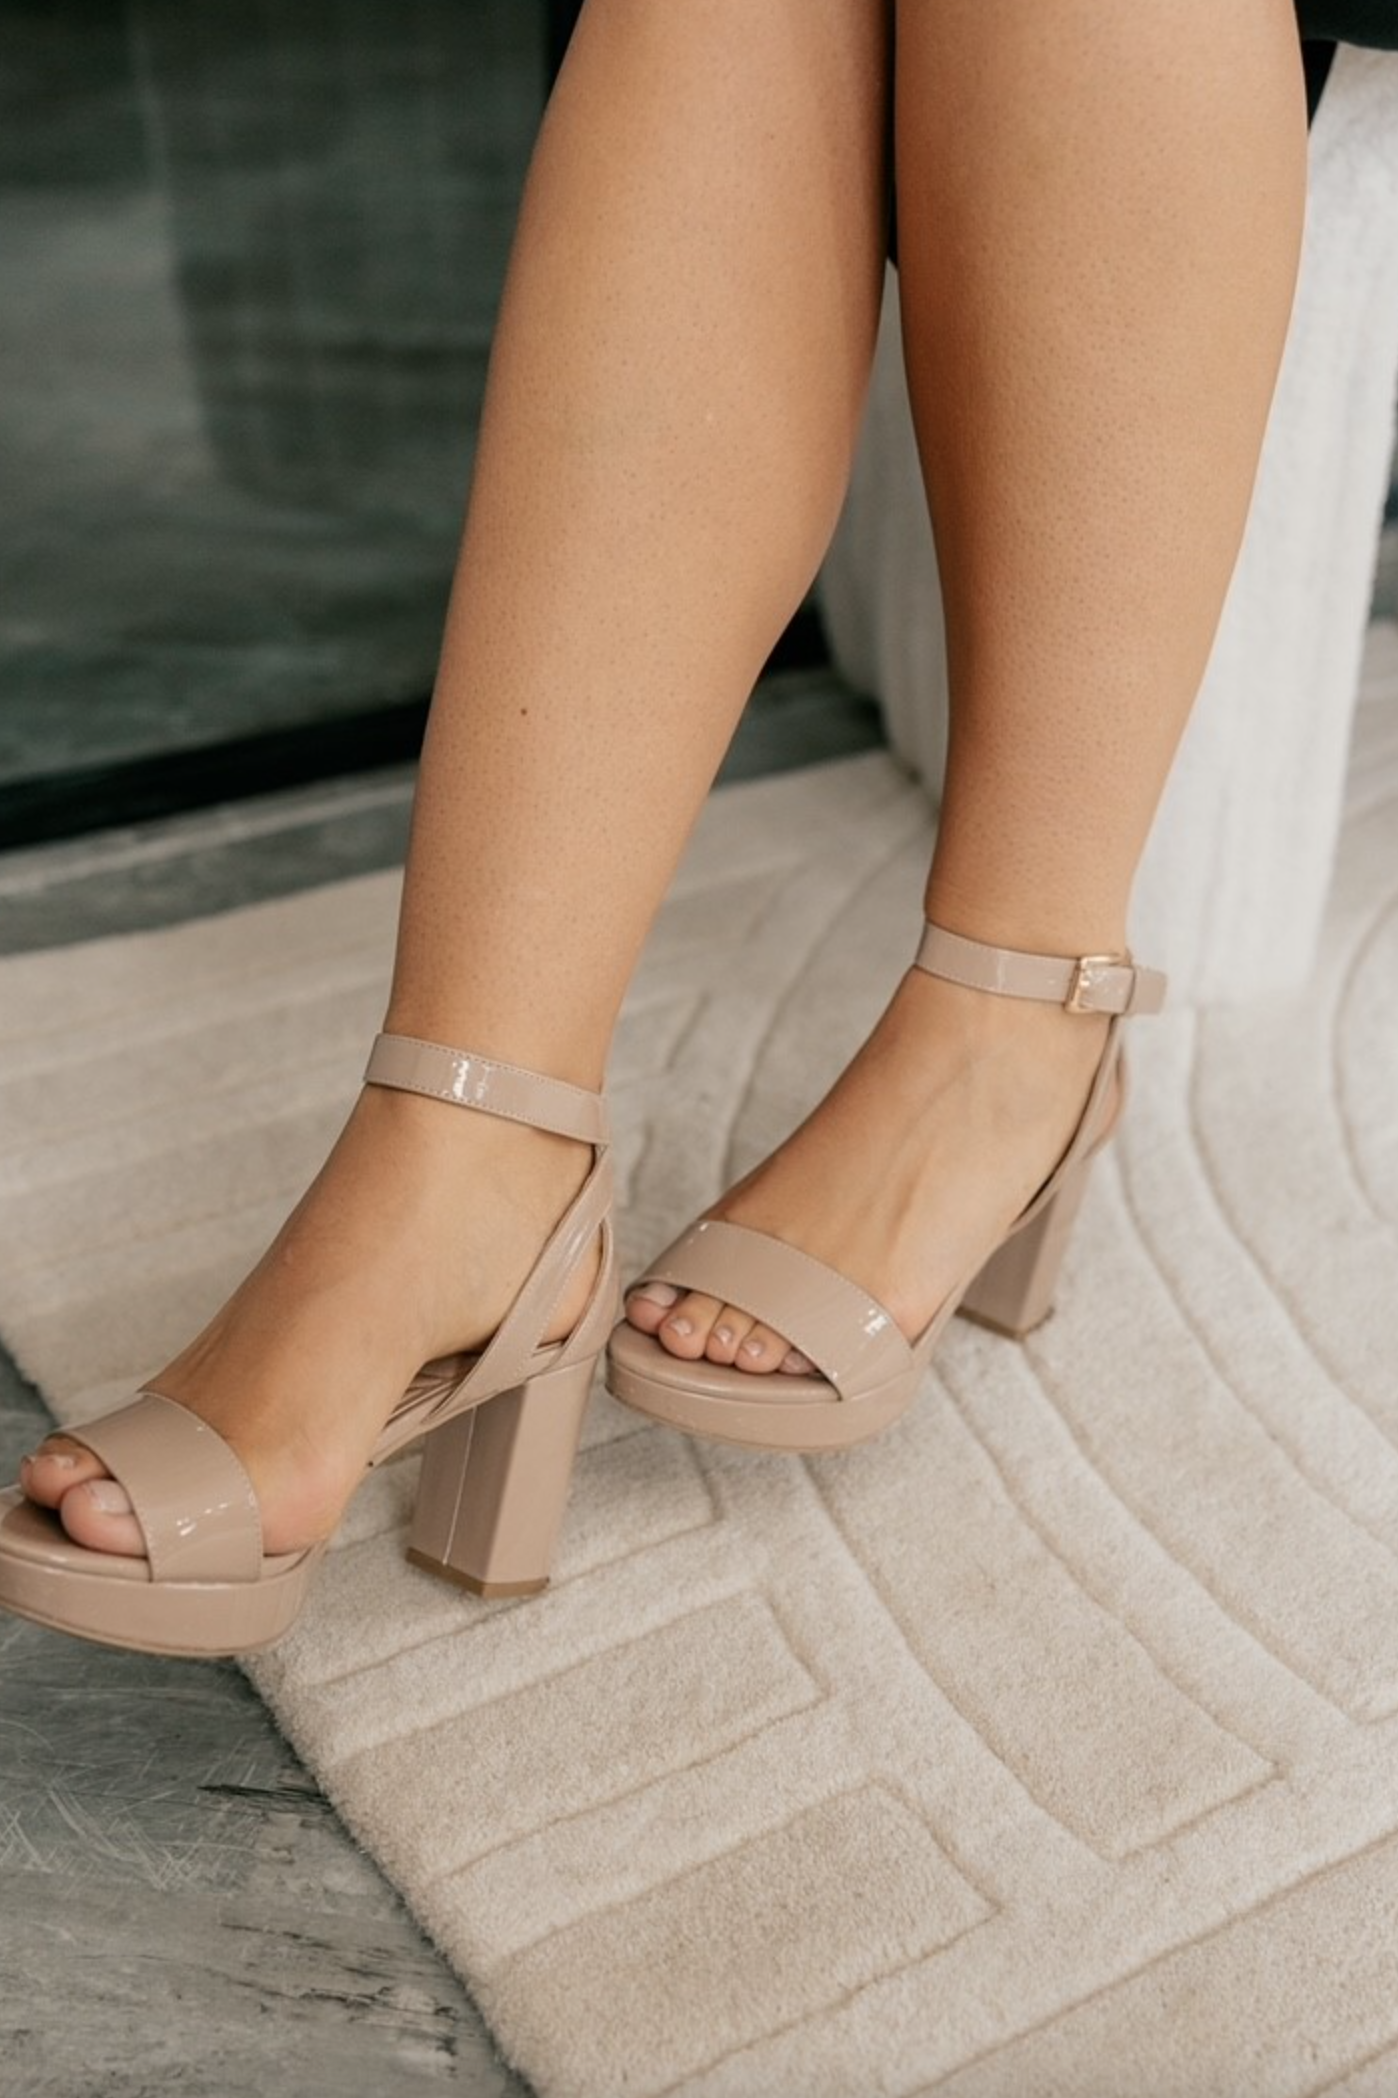 Right front angle view of female model wearing the Go On 2 Dress Sandal which features nude patent leather fabric, monochrome block heel, a delicate adjustable ankle strap, and a narrow vamp.